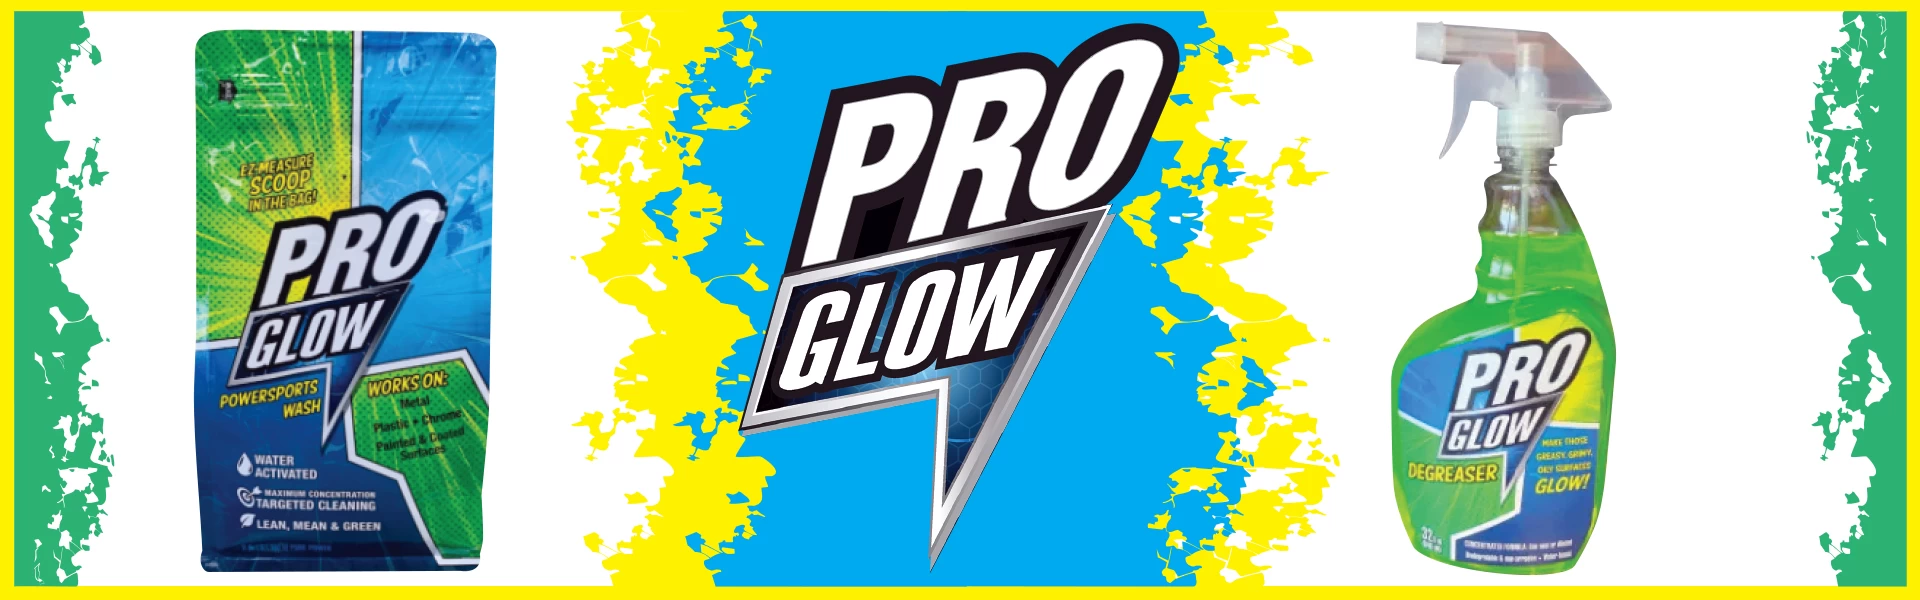 ProGlow products now carried at Day Motor Sports